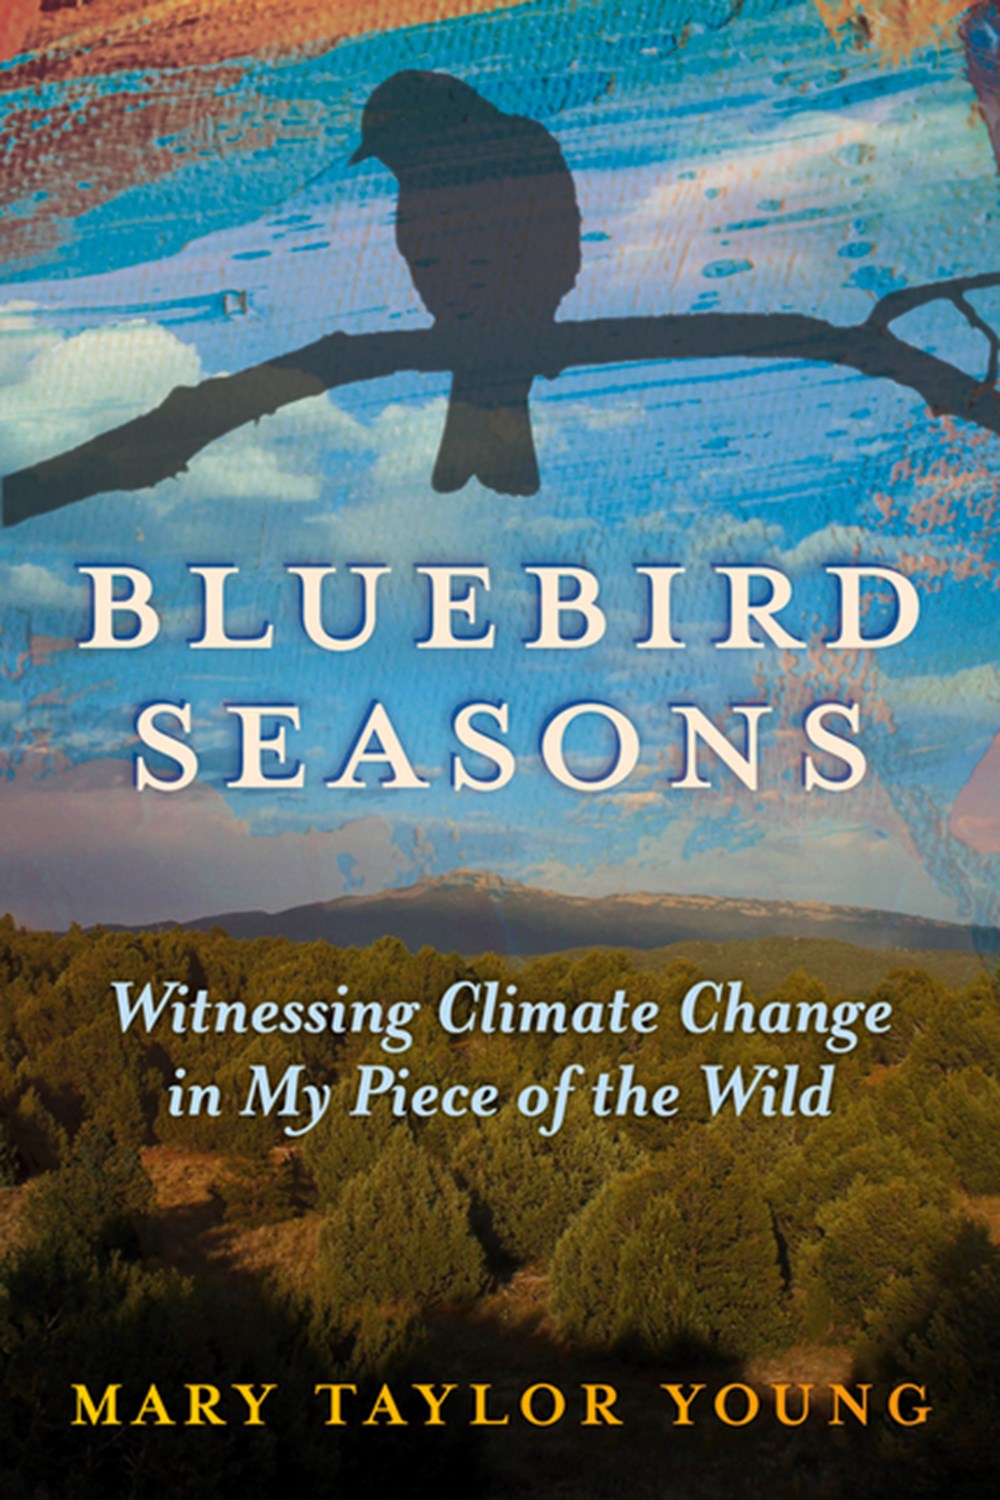 Bluebird Seasons: Witnessing Climate Change in My Piece of the Wild